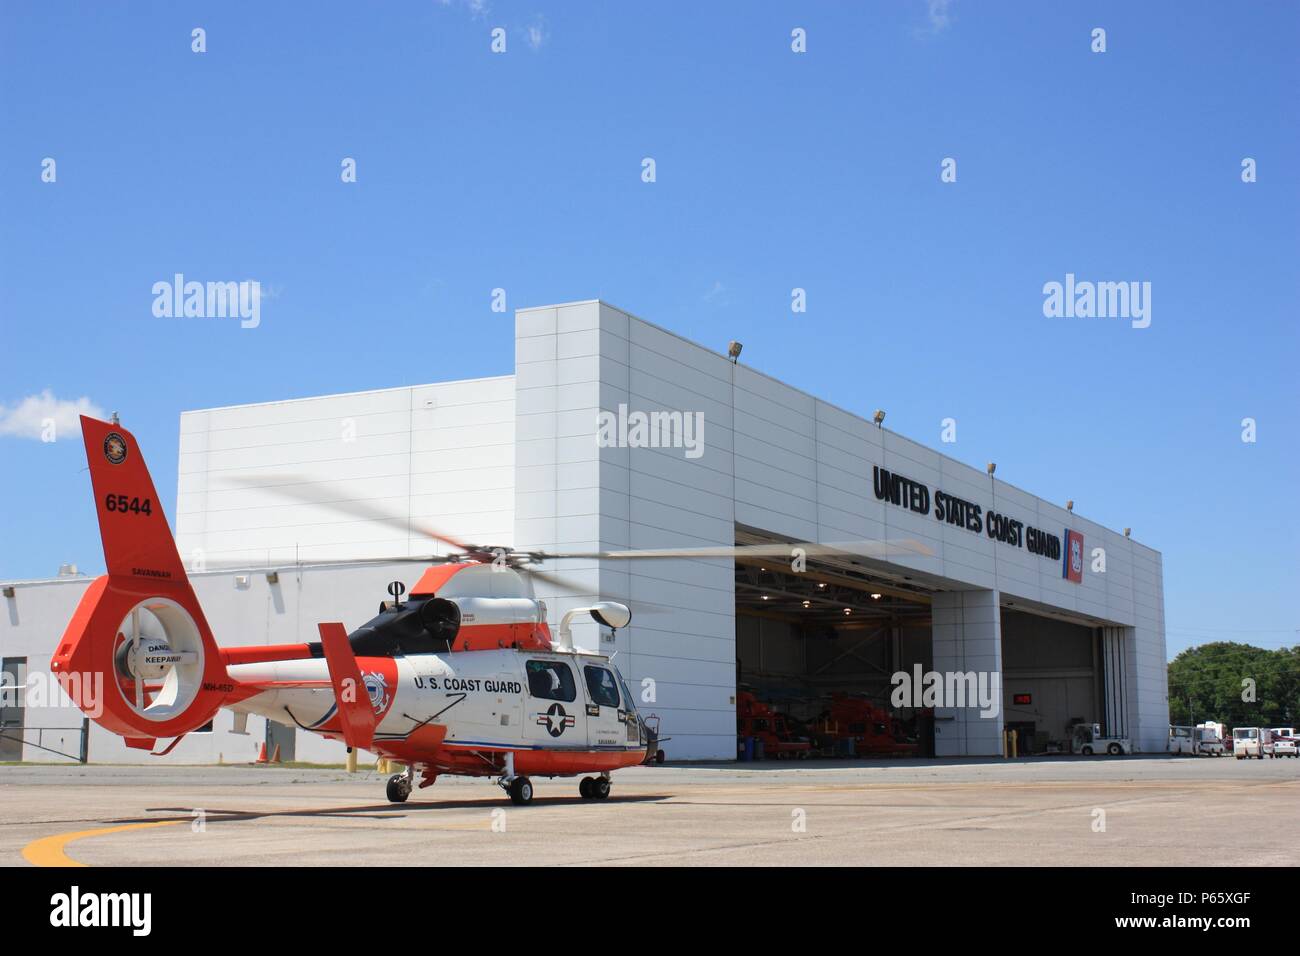 A specially-painted MH-65 Dolphin helicopter sits outside the hangar of Coast Guard Air Station Savannah, Georgia, May 4, 2016, in preparation for the unit’s observance of 100 years of Coast Guard aviation. This helicopter is one of nine to display this particular paint scheme, reminiscent of many early Coast Guard helicopters. U.S. Coast Guard photo by Lt. Trent Meyers Stock Photo